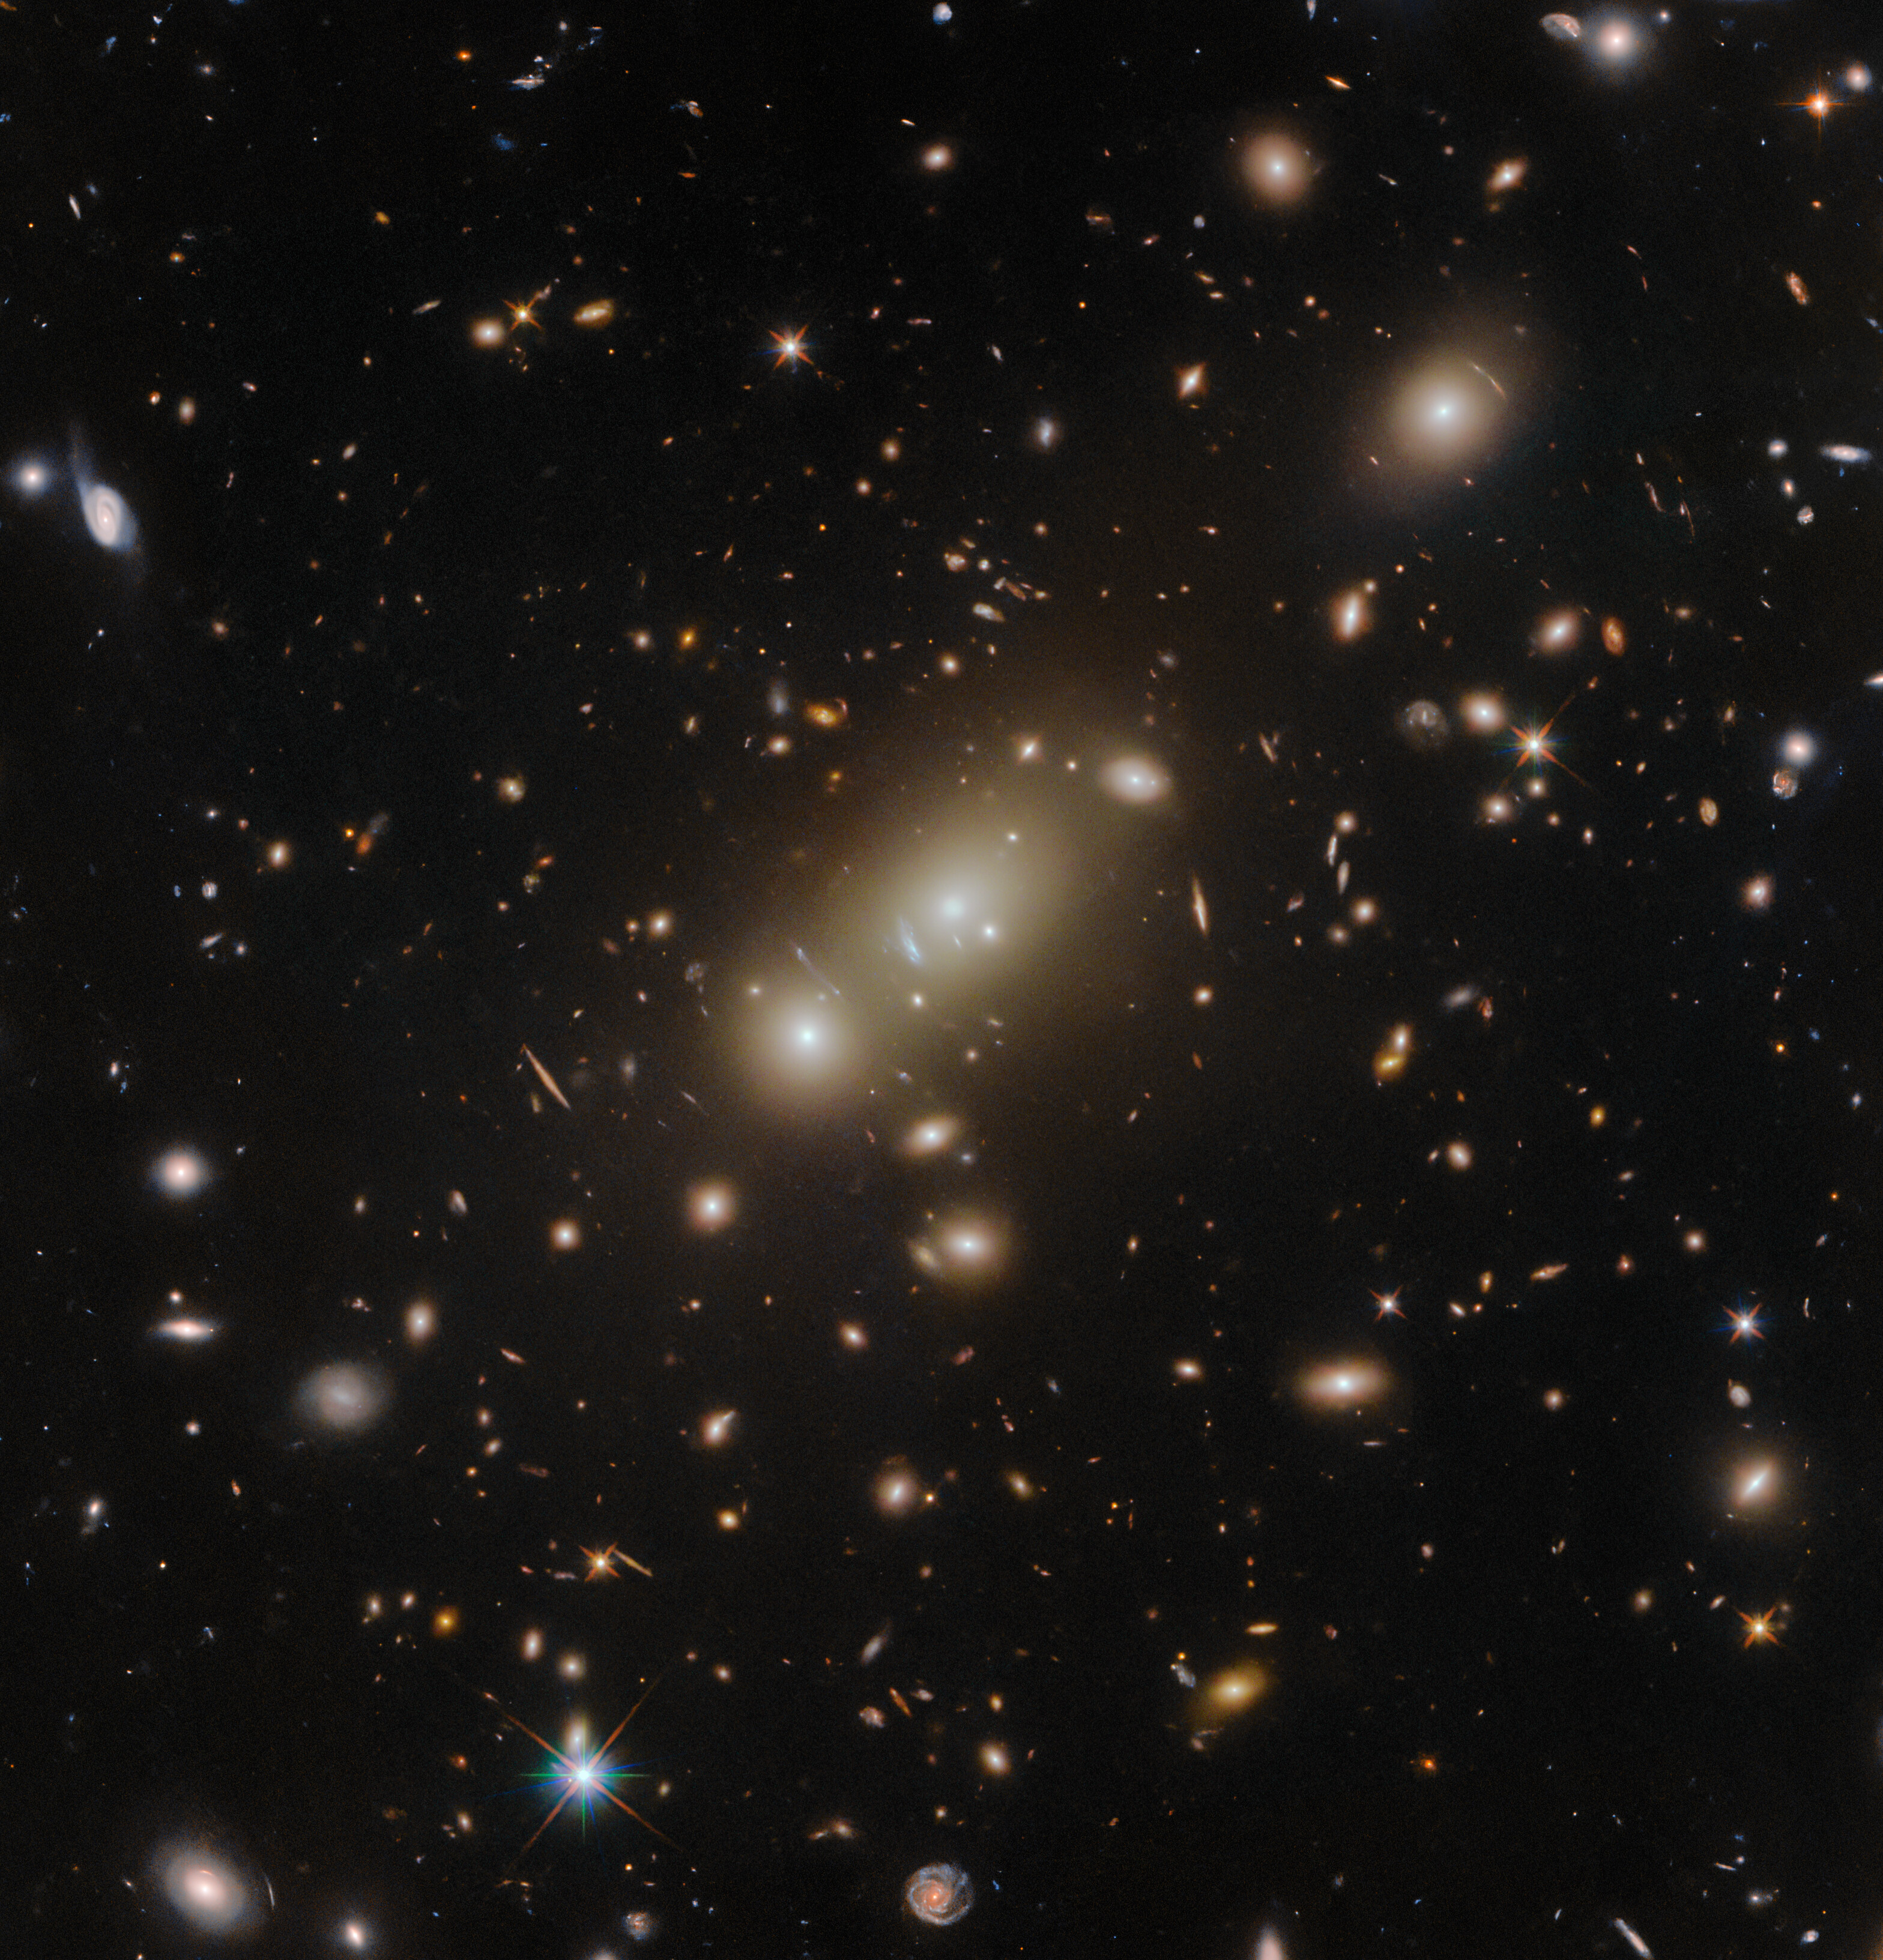 A crowd of oval-shaped elliptical galaxies gather around the largest in the center. They are surrounded by more distant stars and galaxies, that have many shapes and sizes but all are smaller, on a dark background.